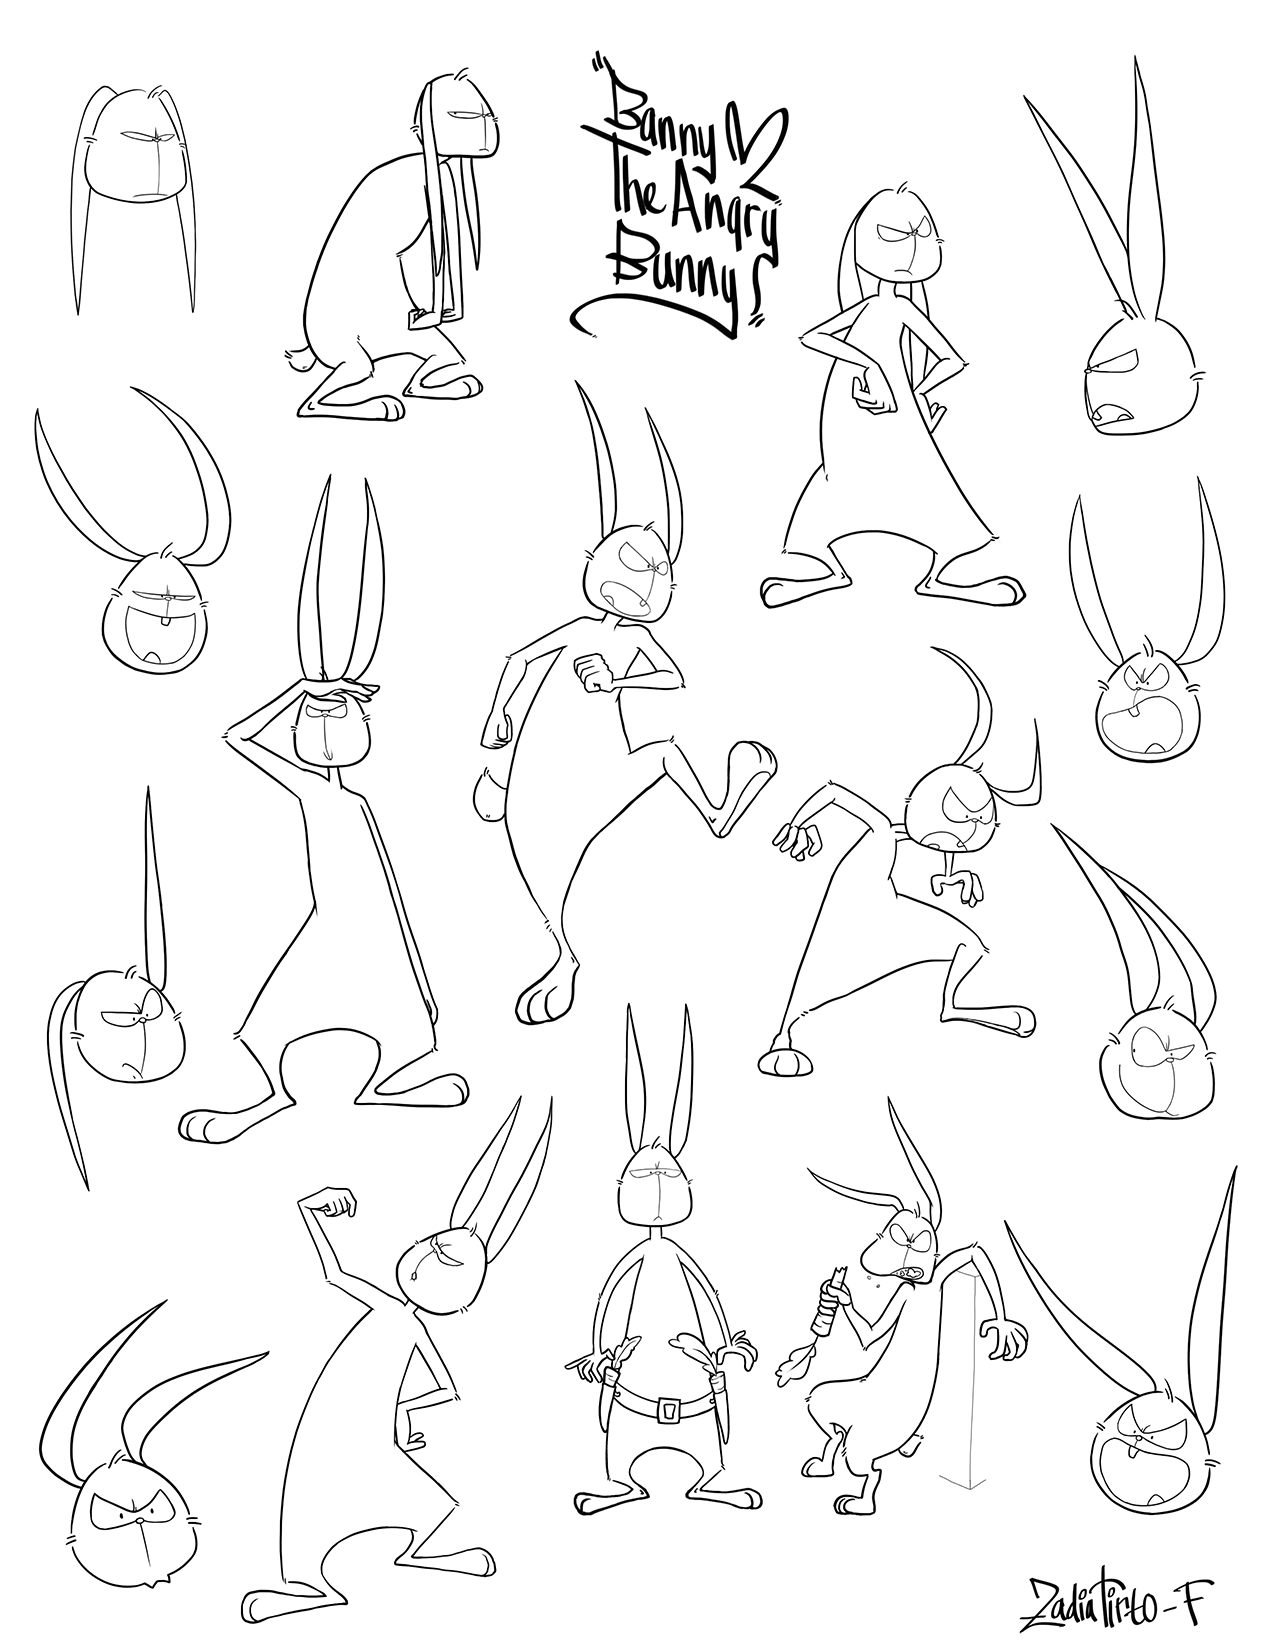 Banny the Angry Bunny - 8 expressions and 8 poses (2nd semester), again ...